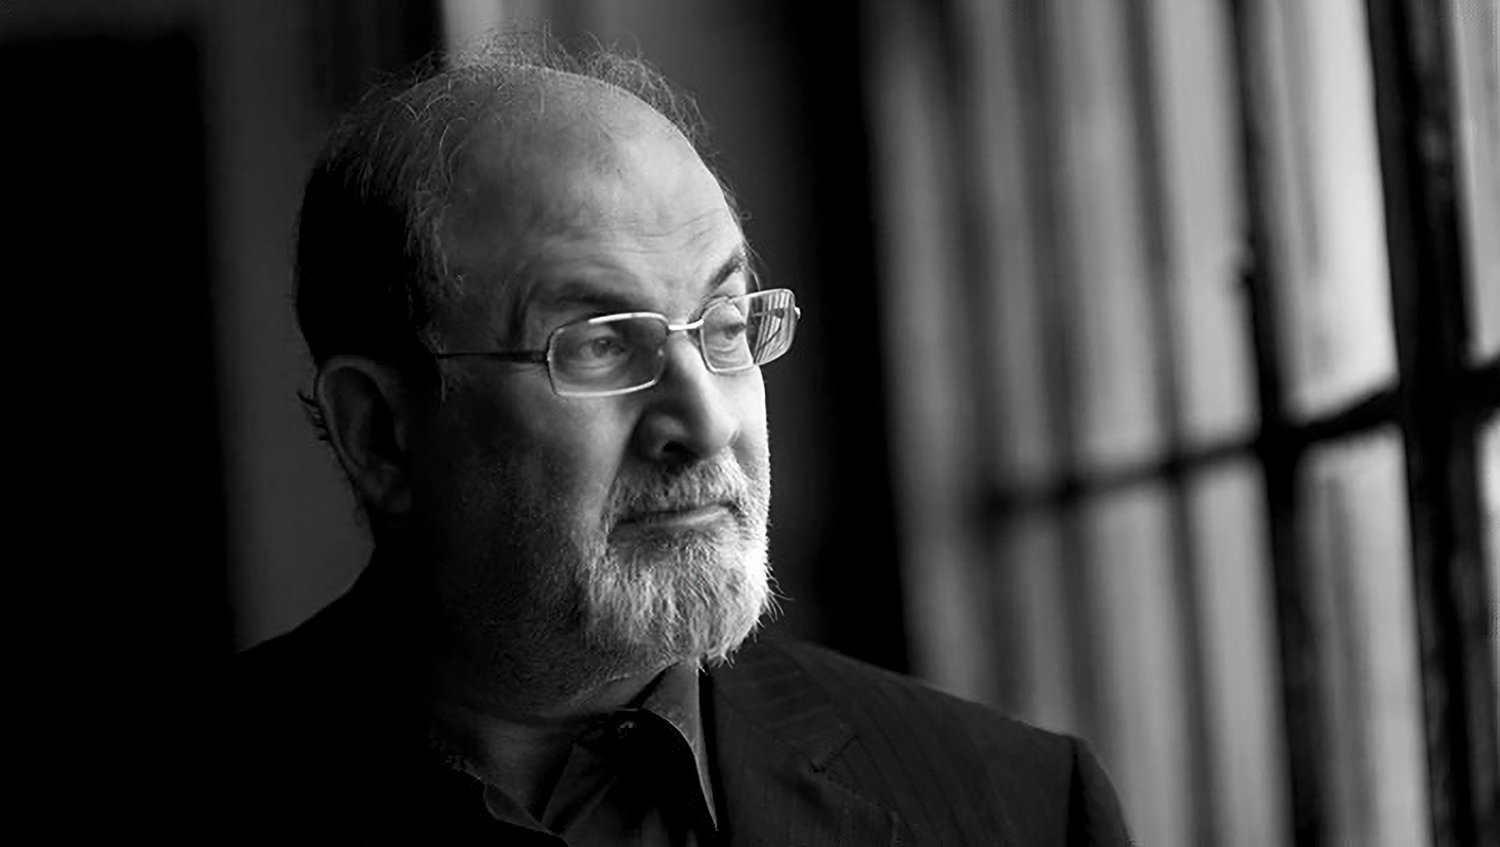 Salman Rushdie, the renowned and controversial writer, was attacked as he was about to give an interview at Chautauqua Institution outside Buffalo. The attack evoked memories of the 1989 firebombing of The Riverdale Press offices about a week after a Buddy Stein, former editor and publisher of The Press, wrote an editorial admonishing national book chains for pulling Rushdie's "Satanic Verses" book from its bookshelves.